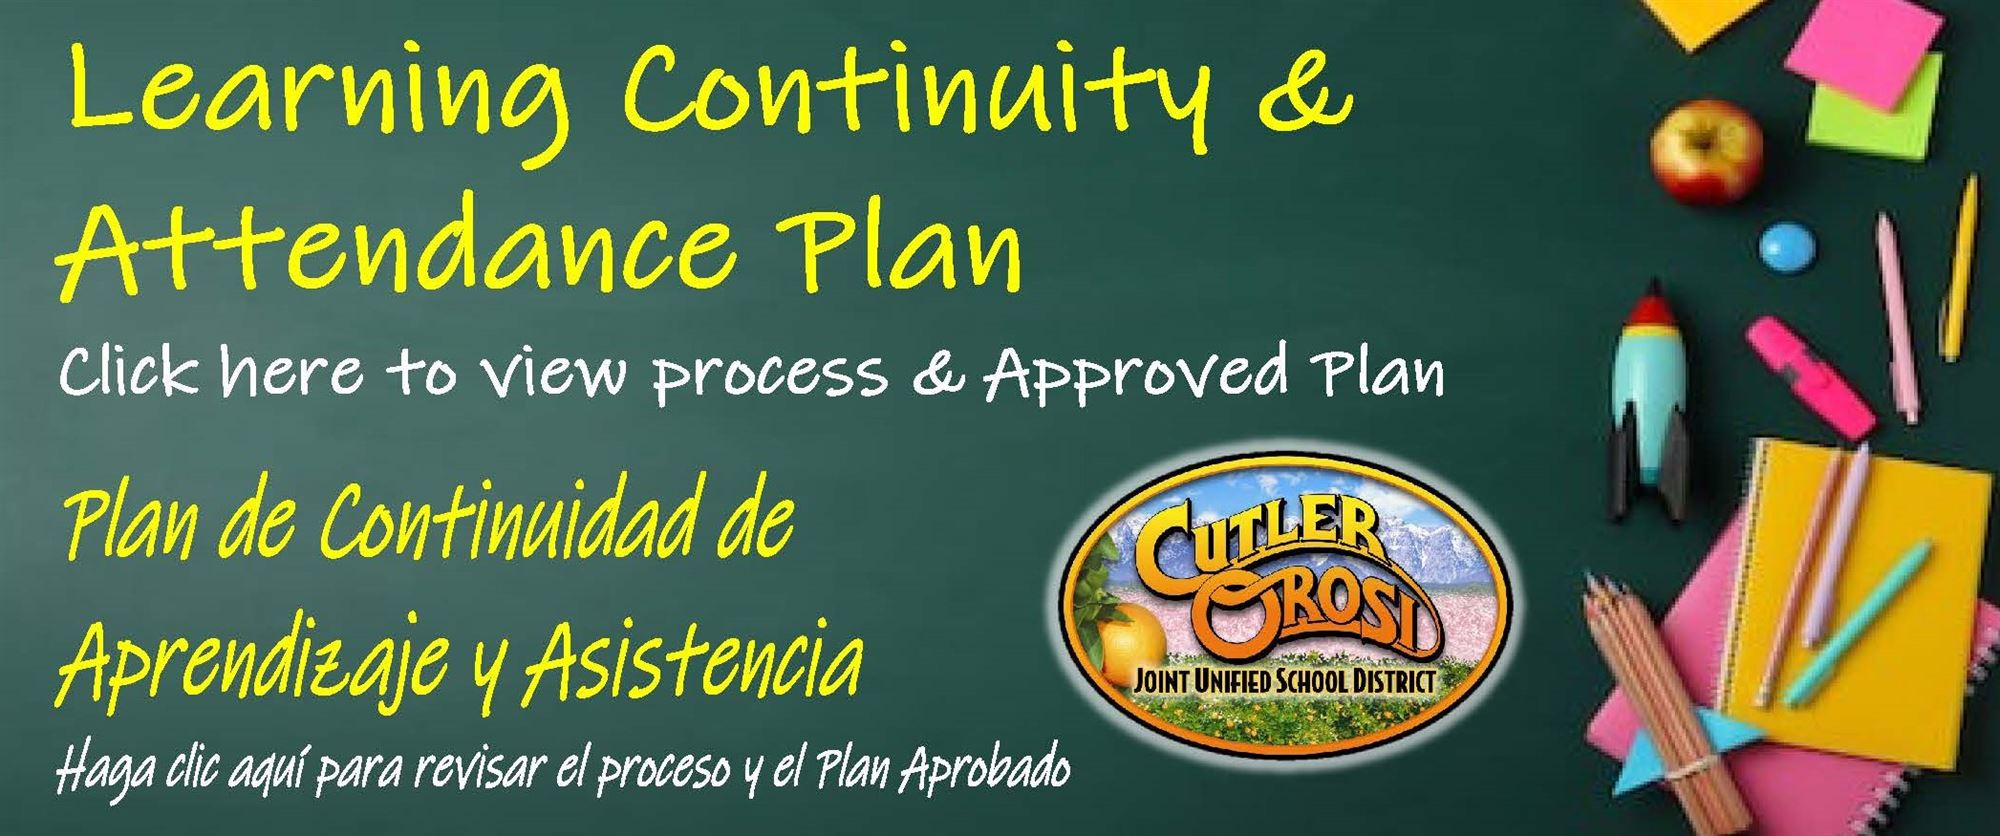 Learning Continuity and Attendance Plane Page Cover Image